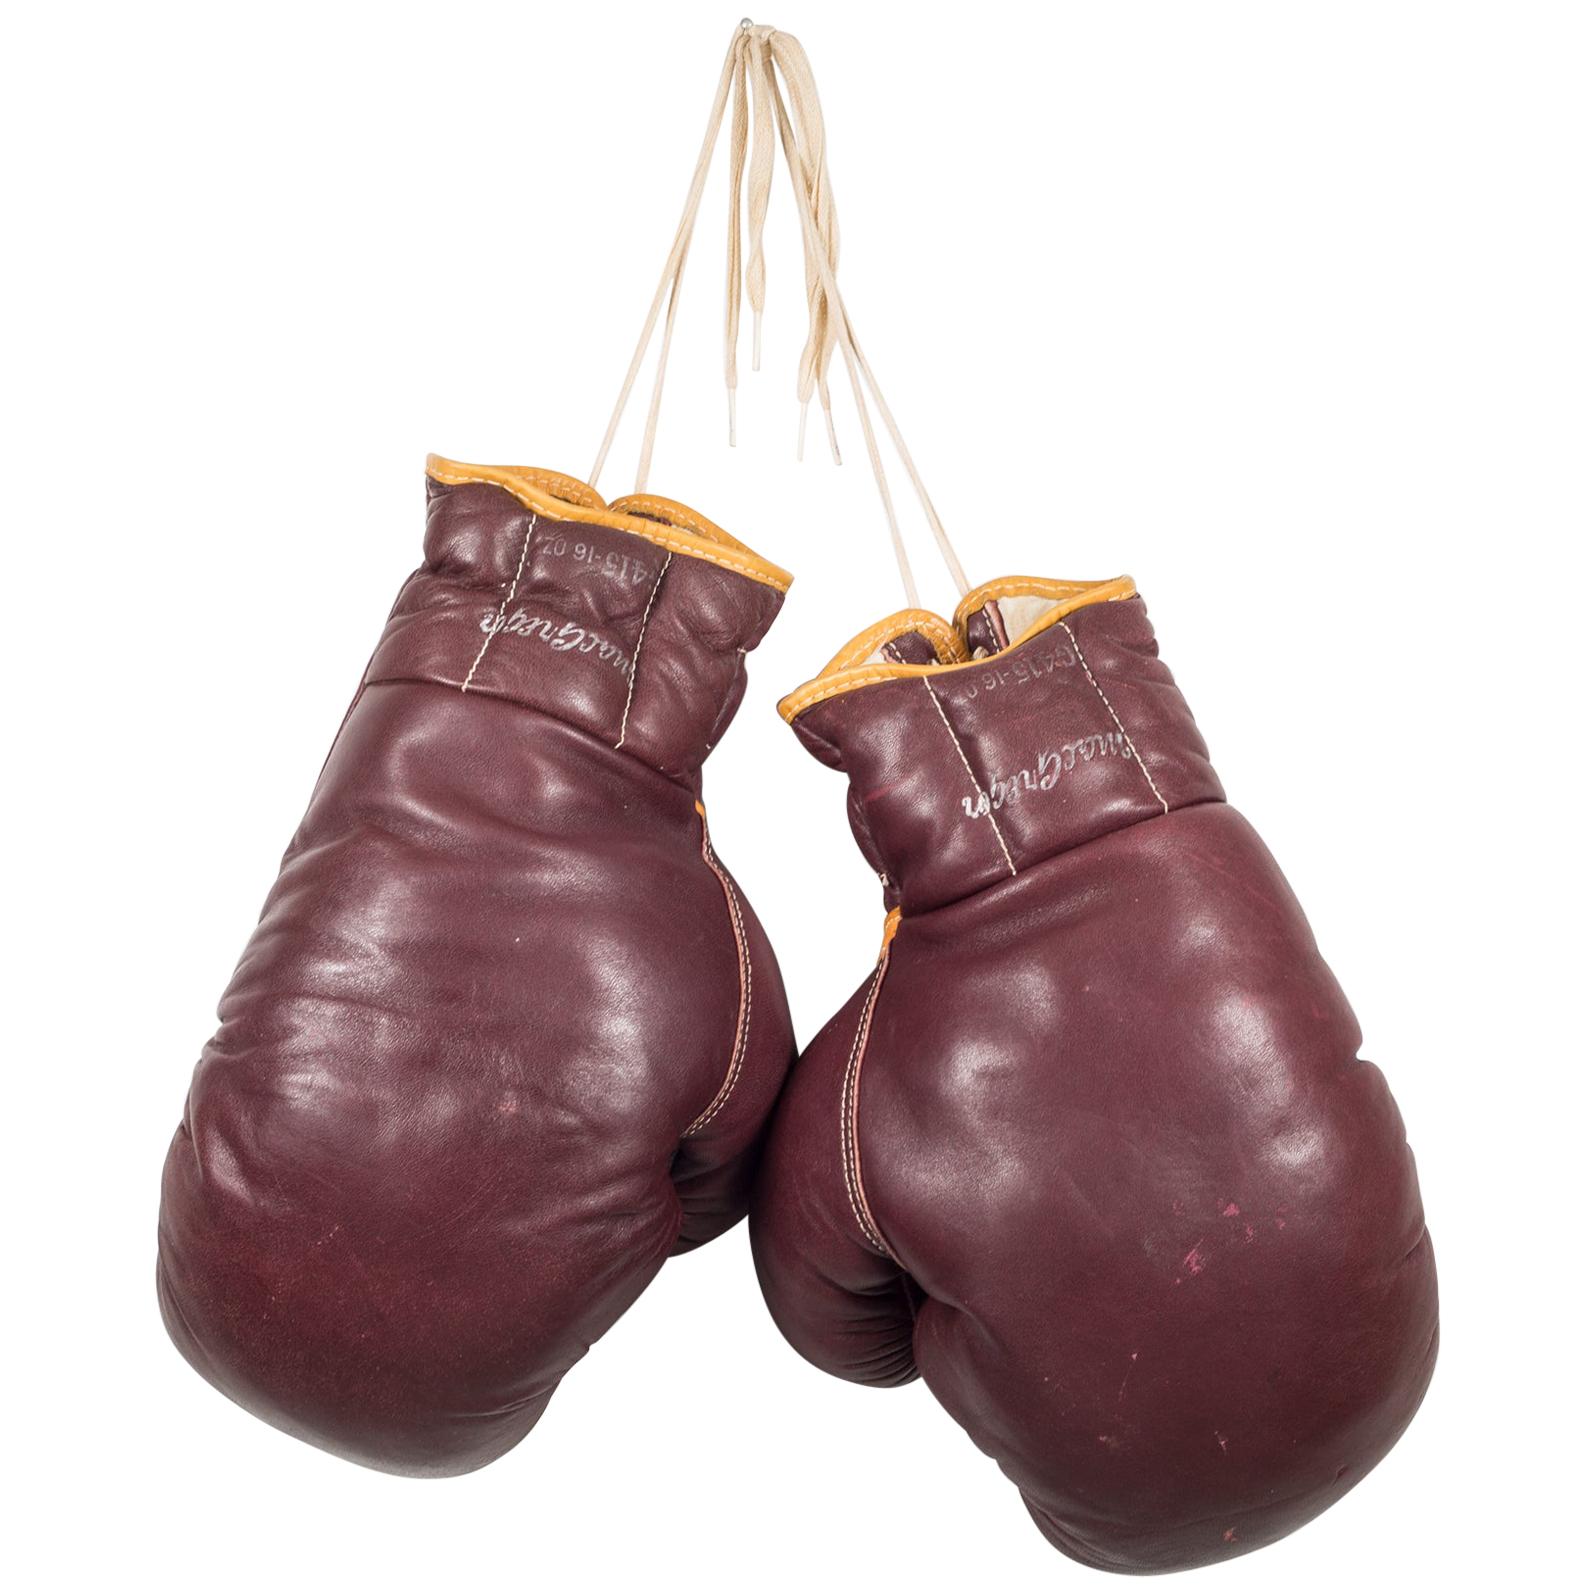 Leather MacGregor Boxing Gloves, circa 1950